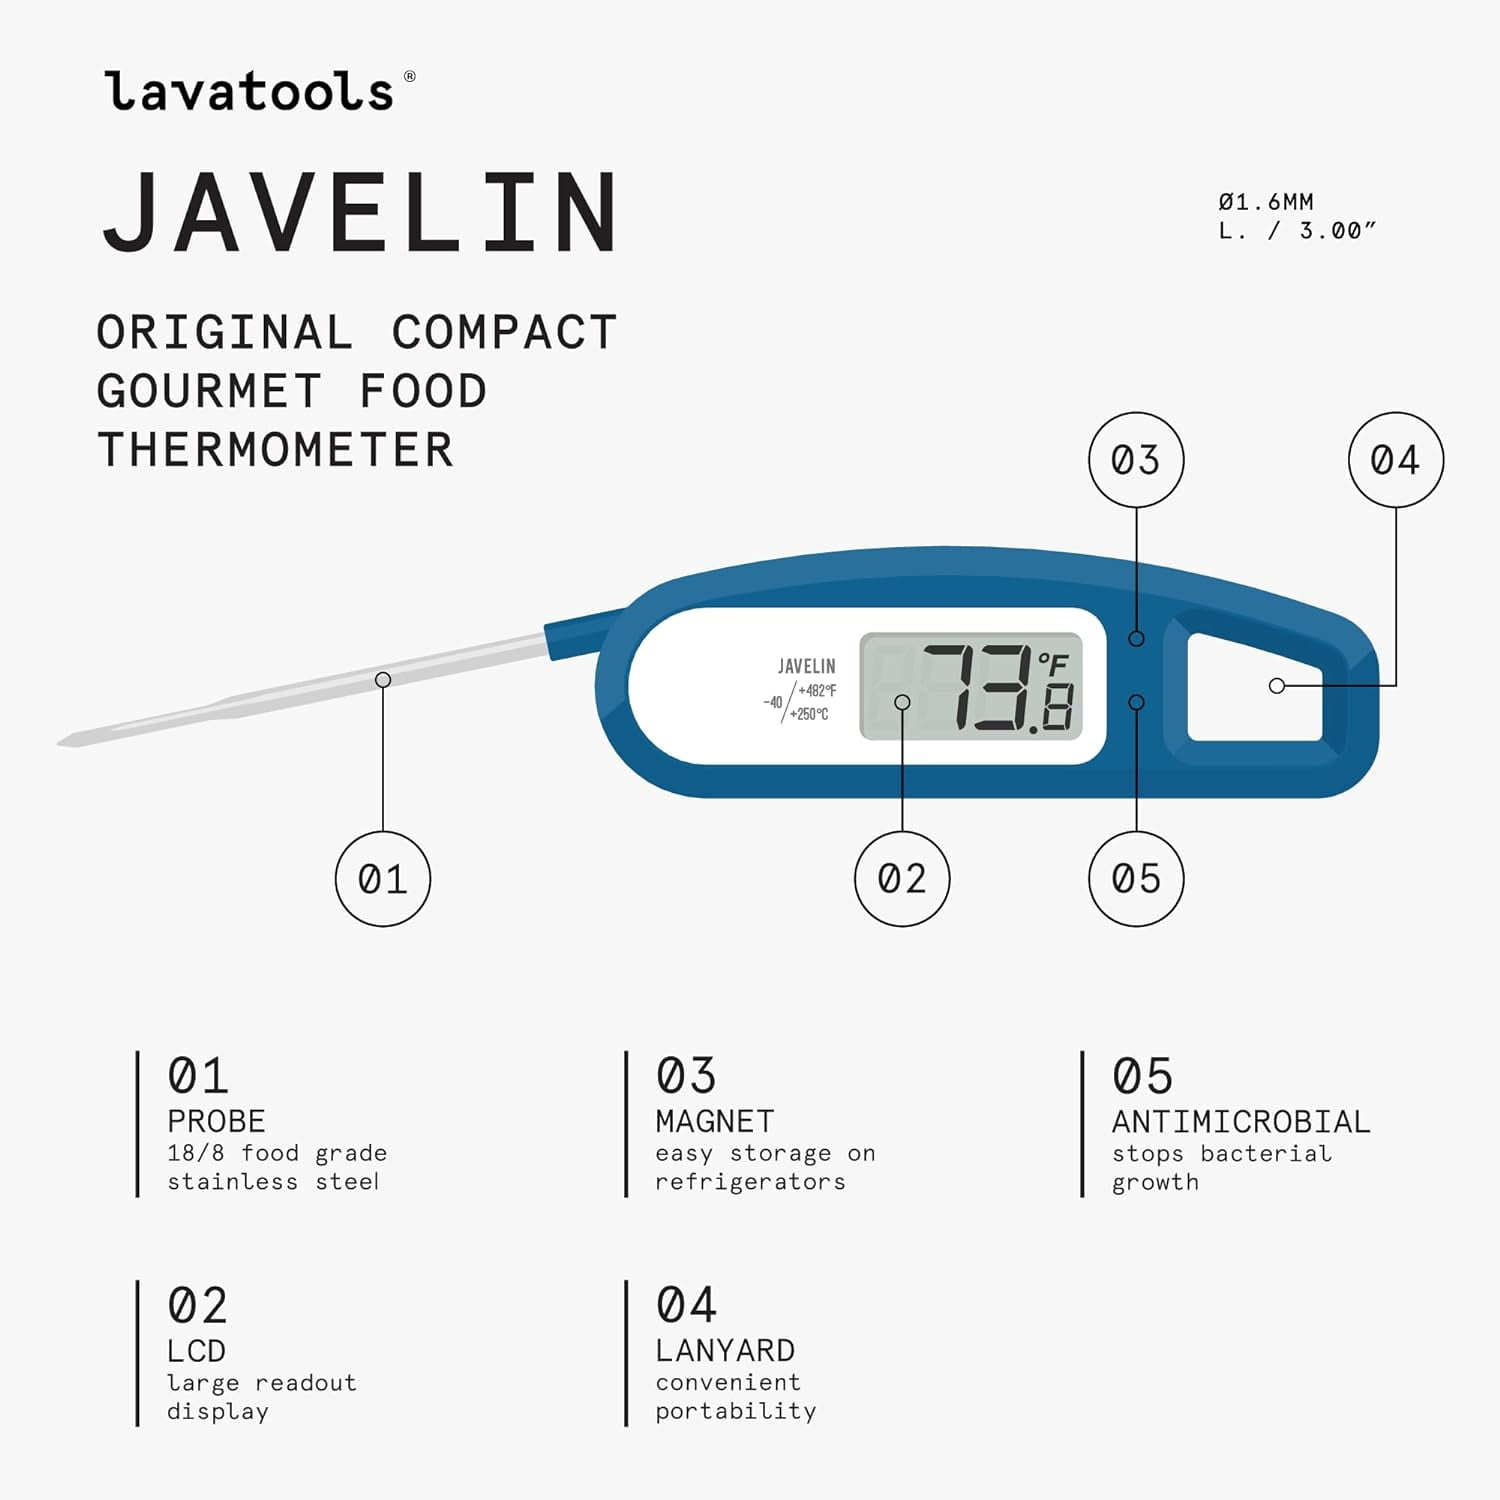  Lavatools PT12 Javelin Ultra Fast Digital Instant Read Meat  Thermometer for Grill and Cooking, 2.75 Probe, Compact Foldable Design,  Large Display, Splash Resistant – Sambal: Instant Read Thermometers: Home &  Kitchen